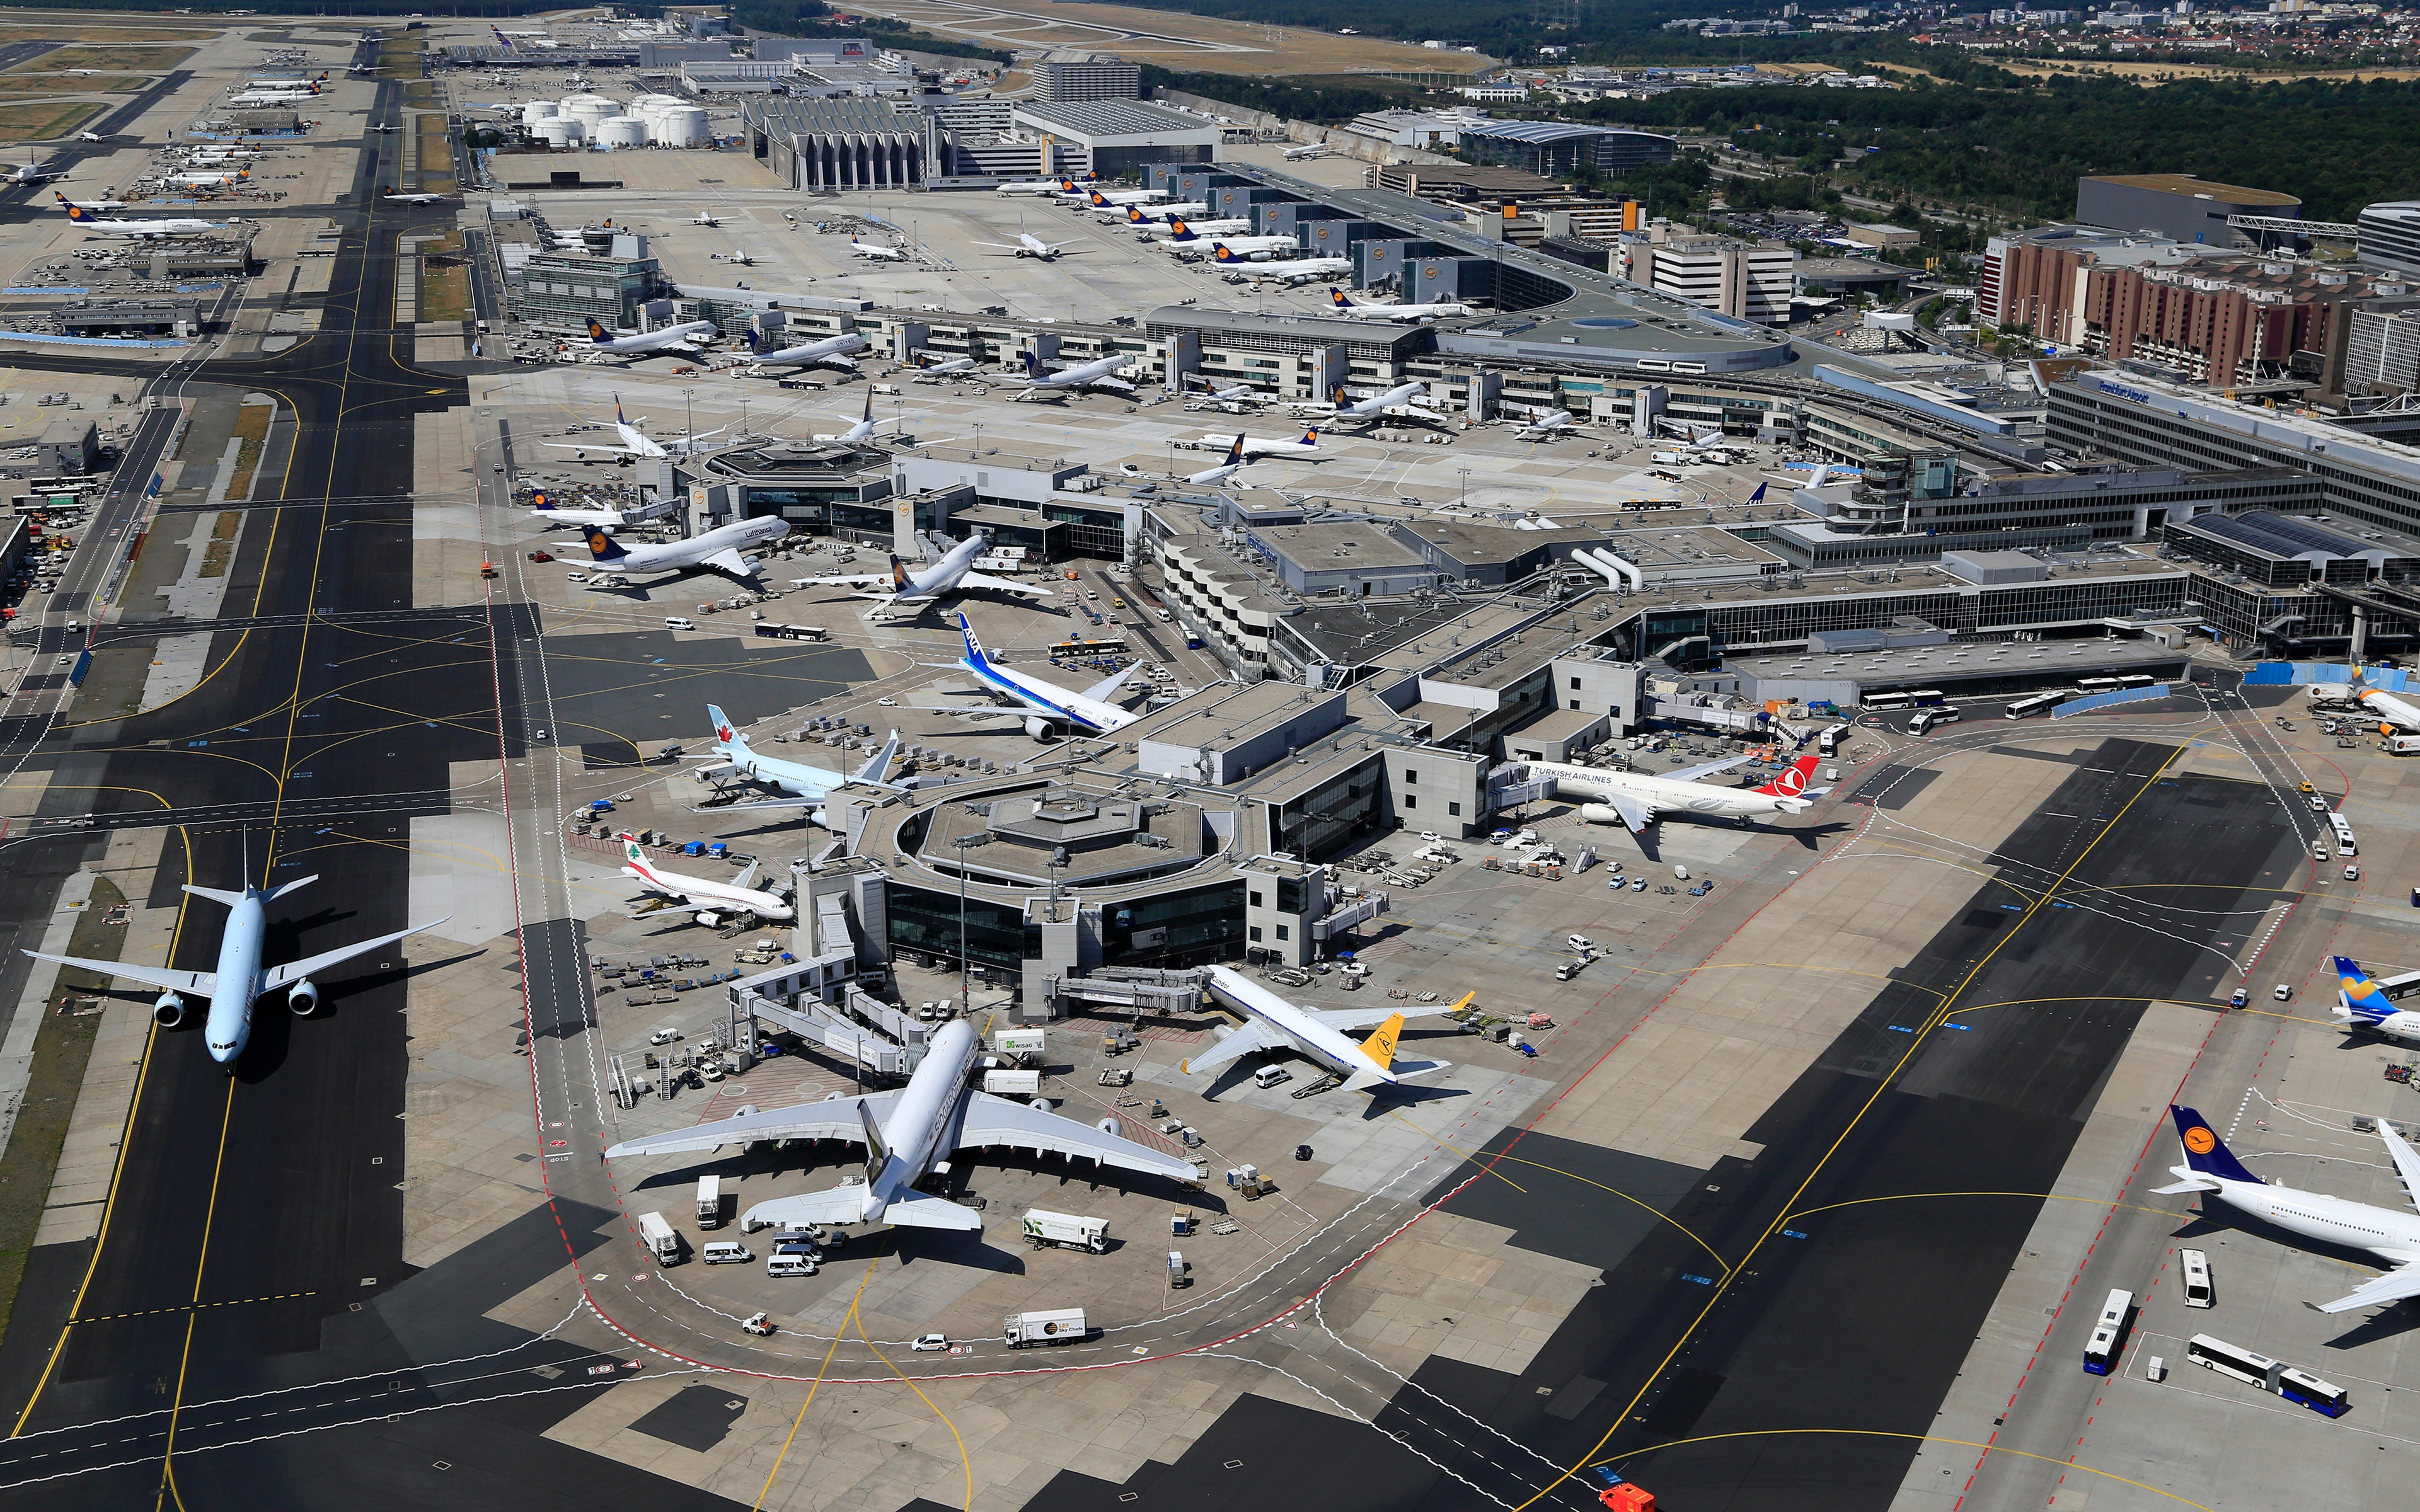 General 3840x2400 Frankfurt Germany airport airplane aircraft passenger aircraft runway aerial view vehicle terminal Lufthansa Turkish Airlines All Nippon Airways jets